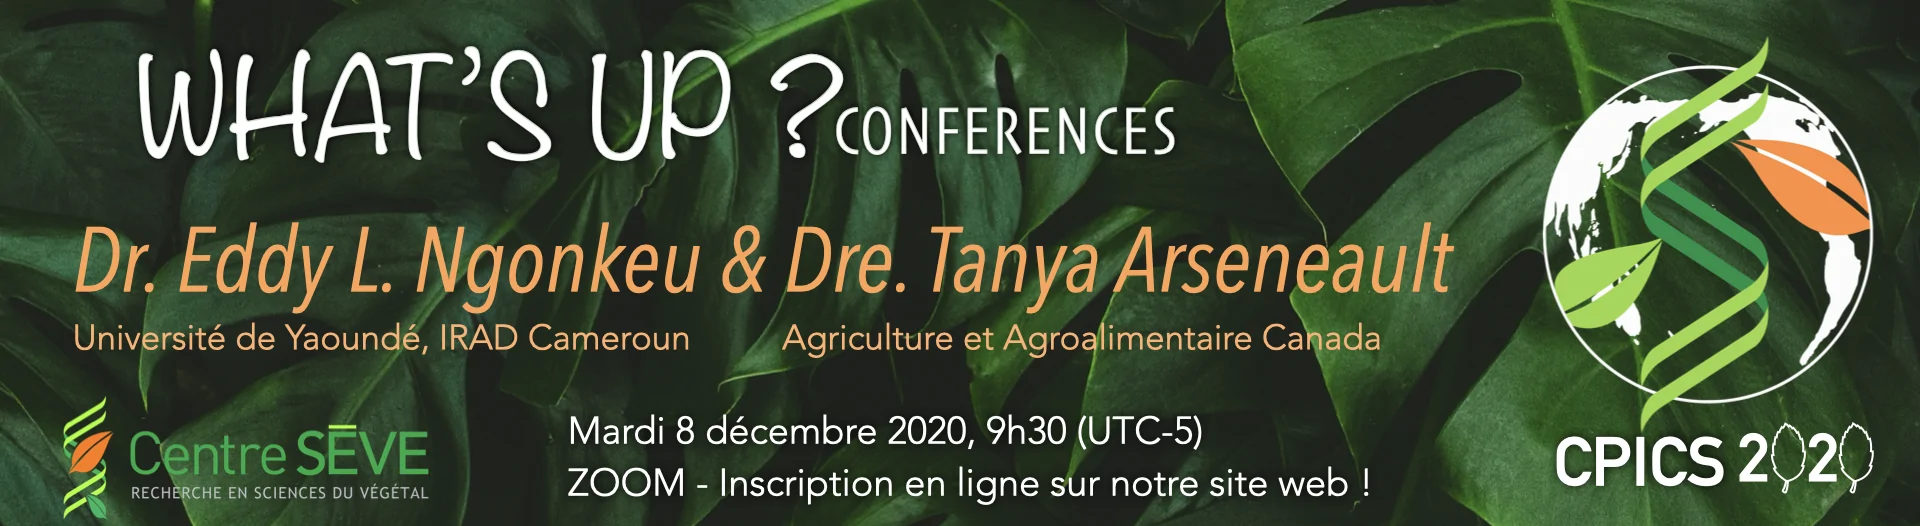 What's up conferences December 8<sup>th</sup> at 9h30 am with Dr. Eddy L. Ngonkeu from Université de Yaoundé and Dr. Tanya Arseneault from Agriculture et Agroalimentaire Canada